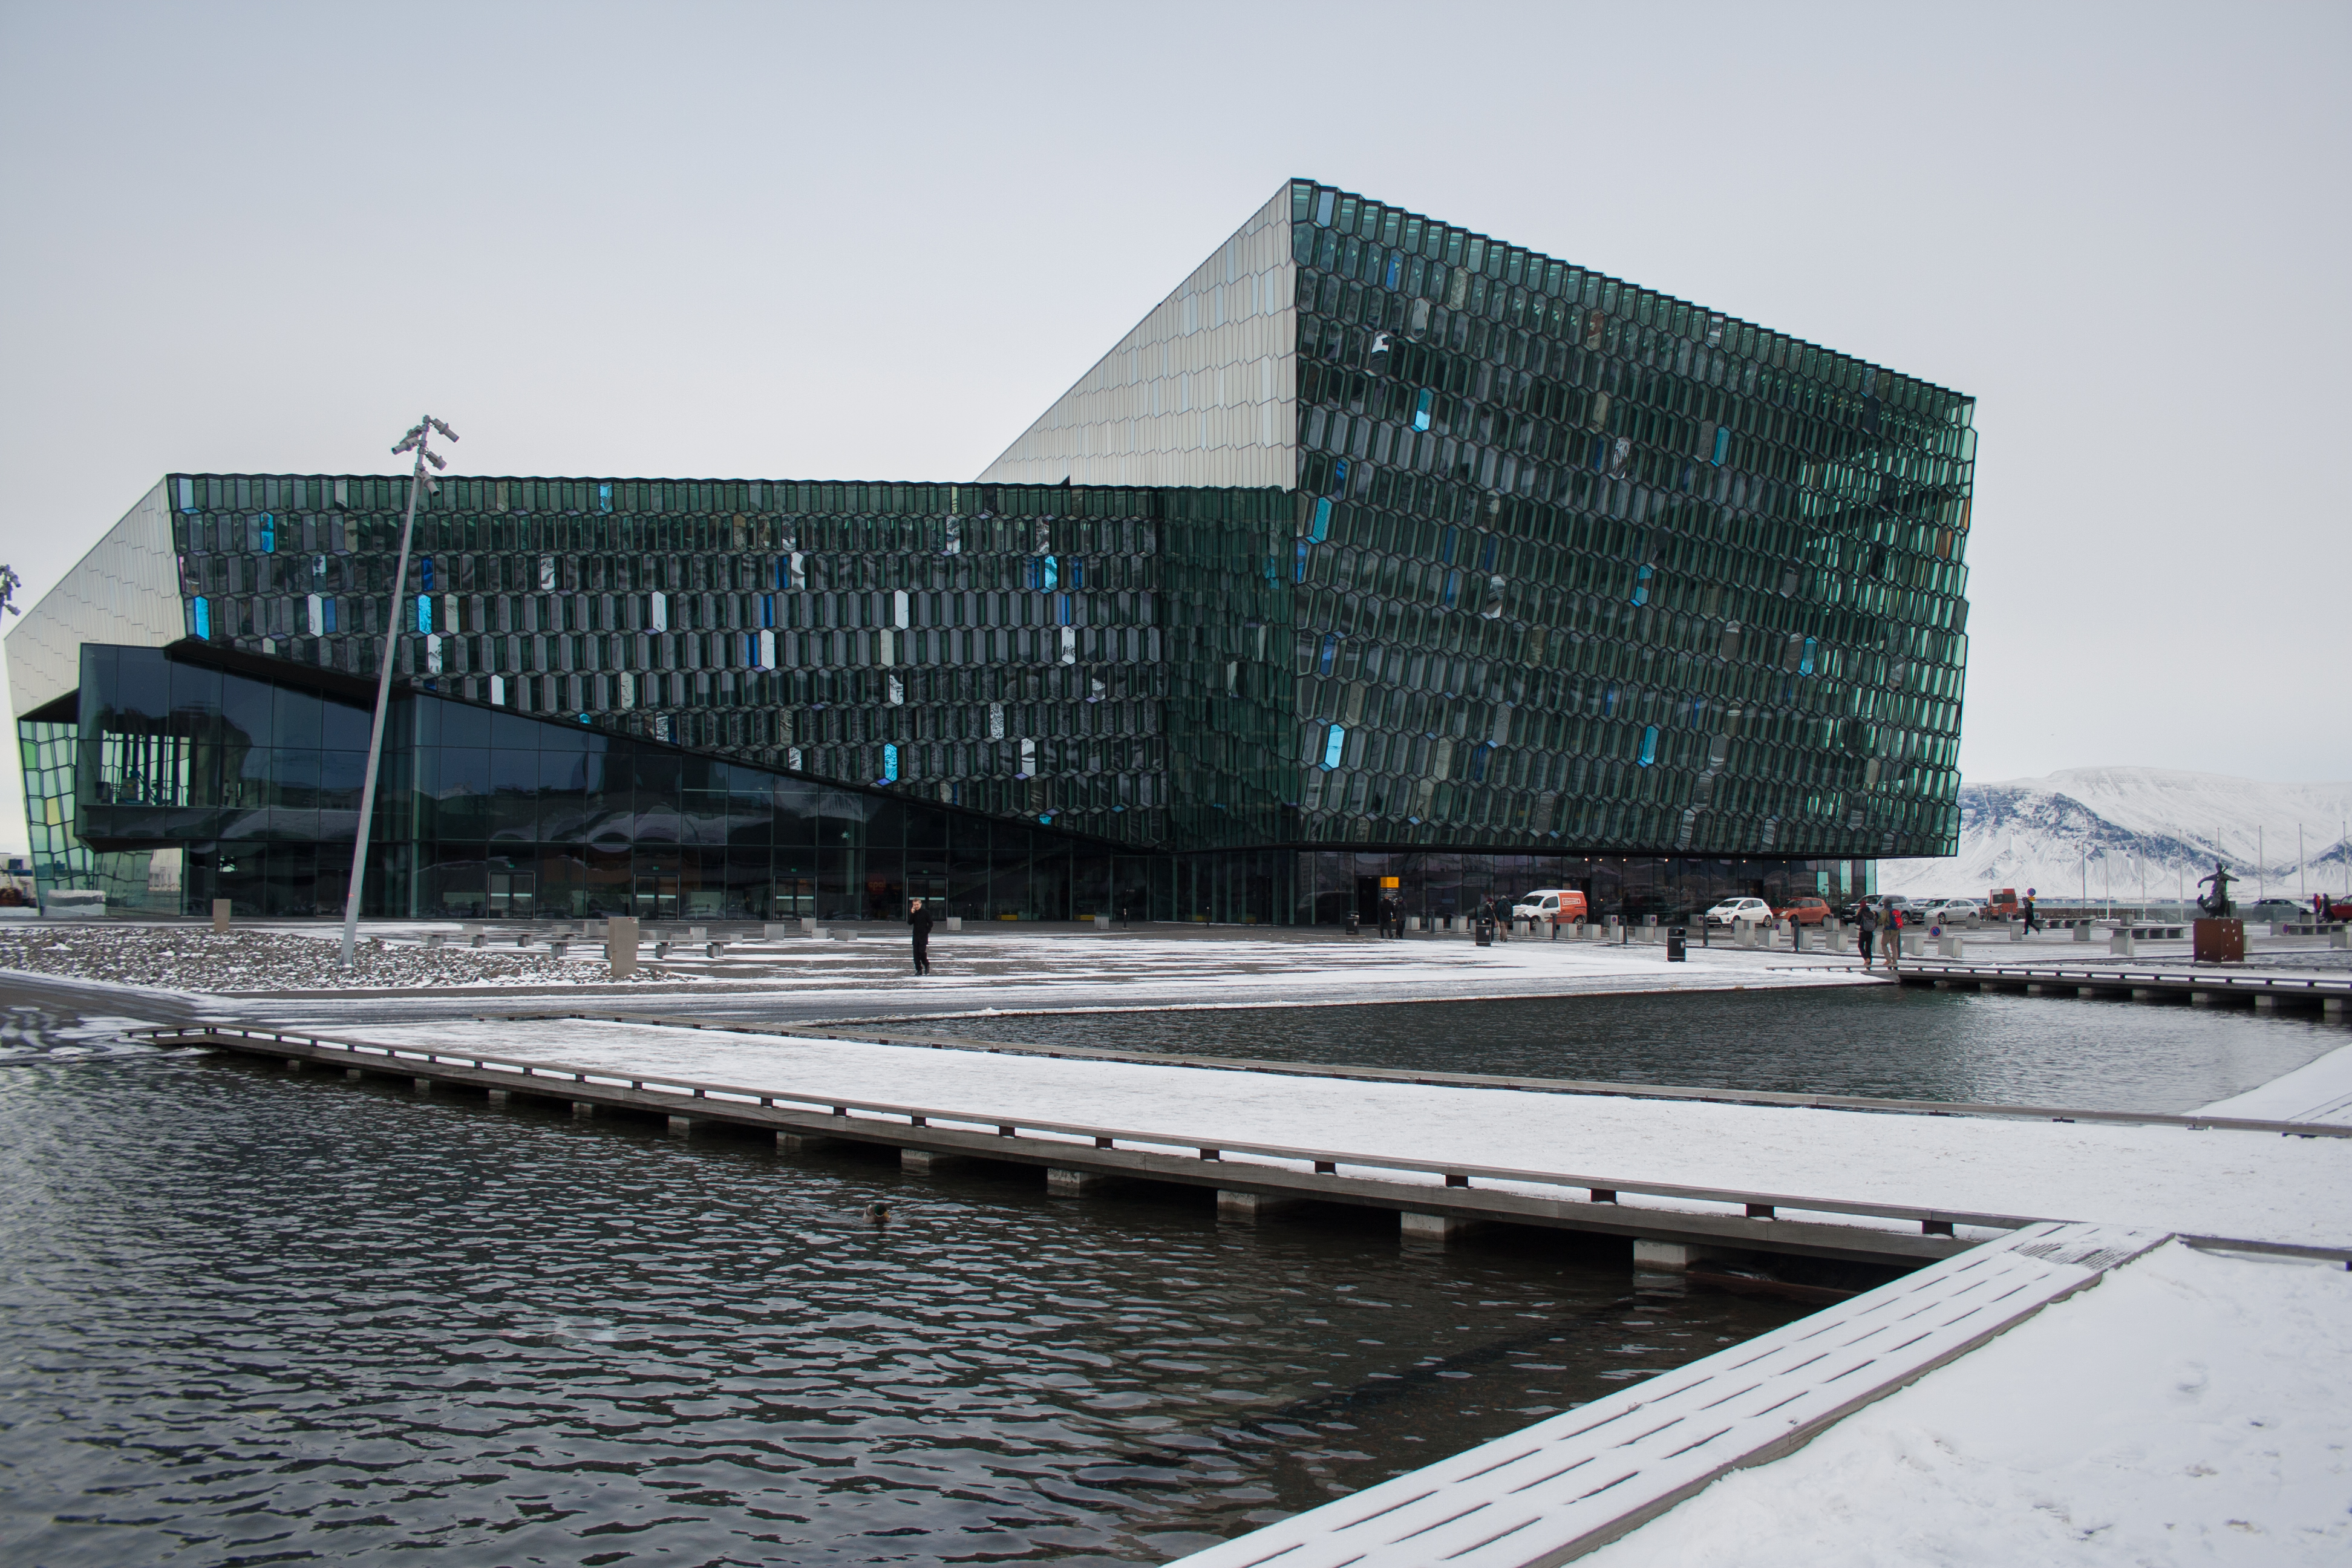 The architecture and decor of Harpa were inspired by Icelandic nature